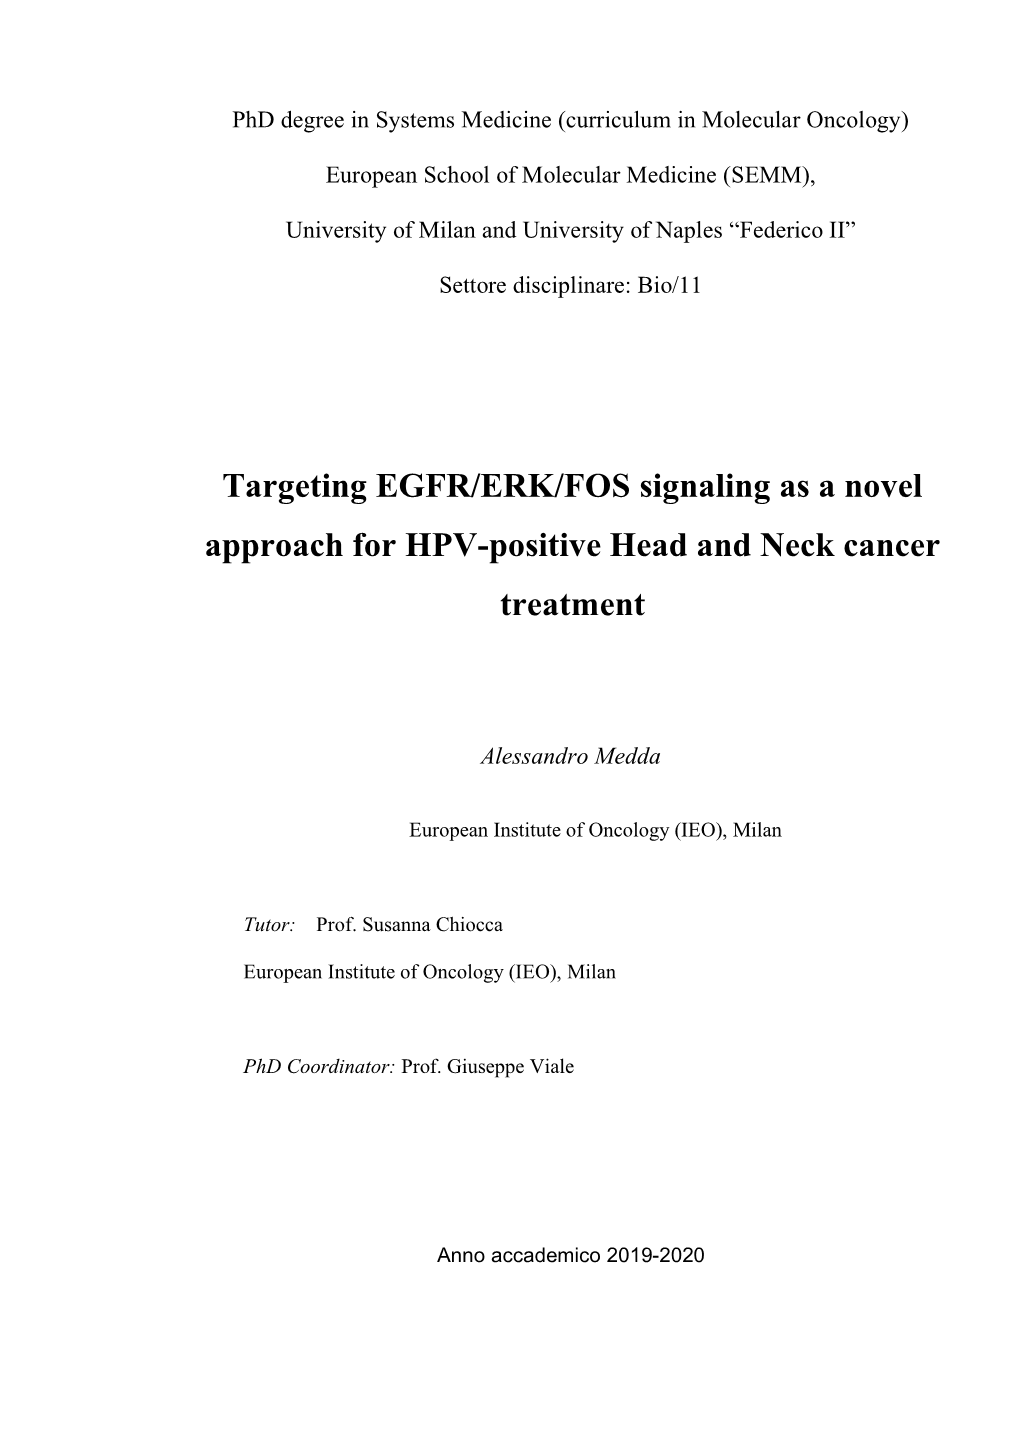 Targeting EGFR/ERK/FOS Signaling As a Novel Approach for HPV-Positive Head and Neck Cancer Treatment